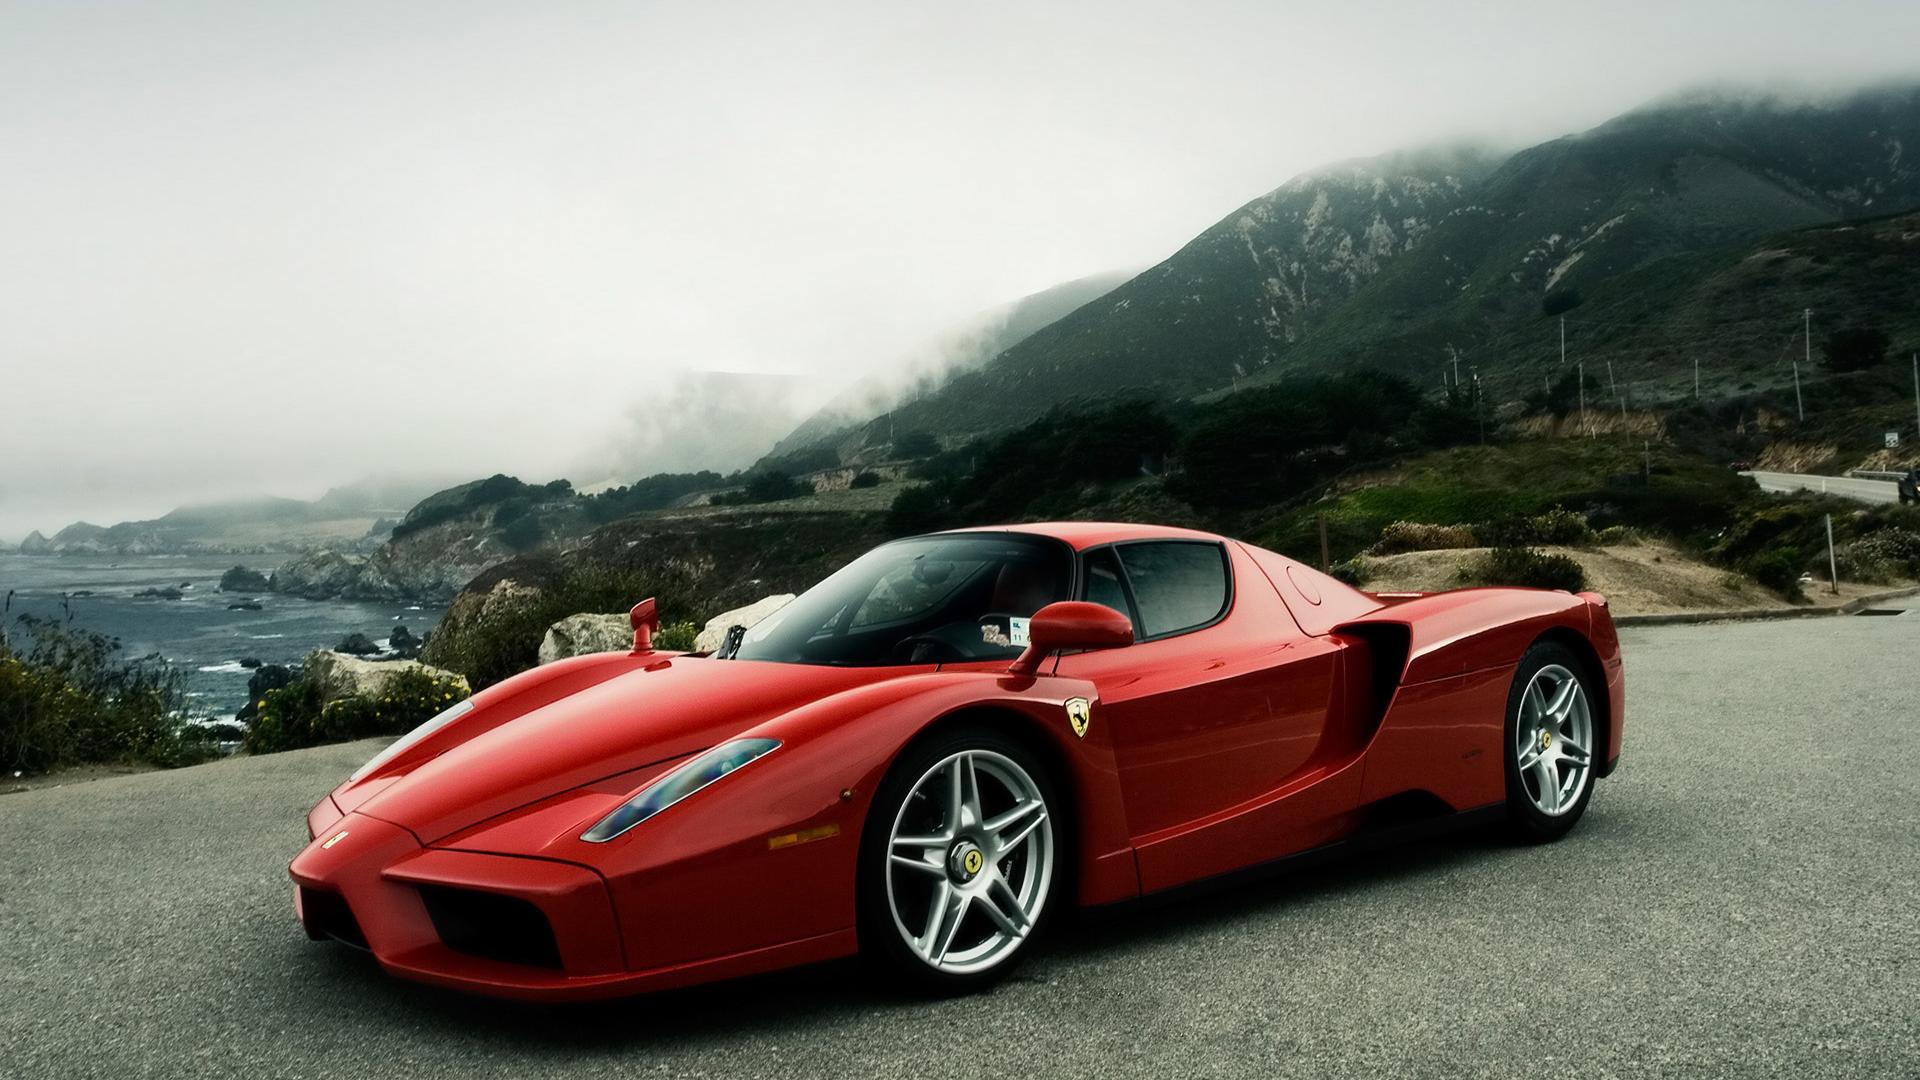  Enzo Sports Cars HD Wallpaper wallpapers55com   Best Wallpapers 1920x1080